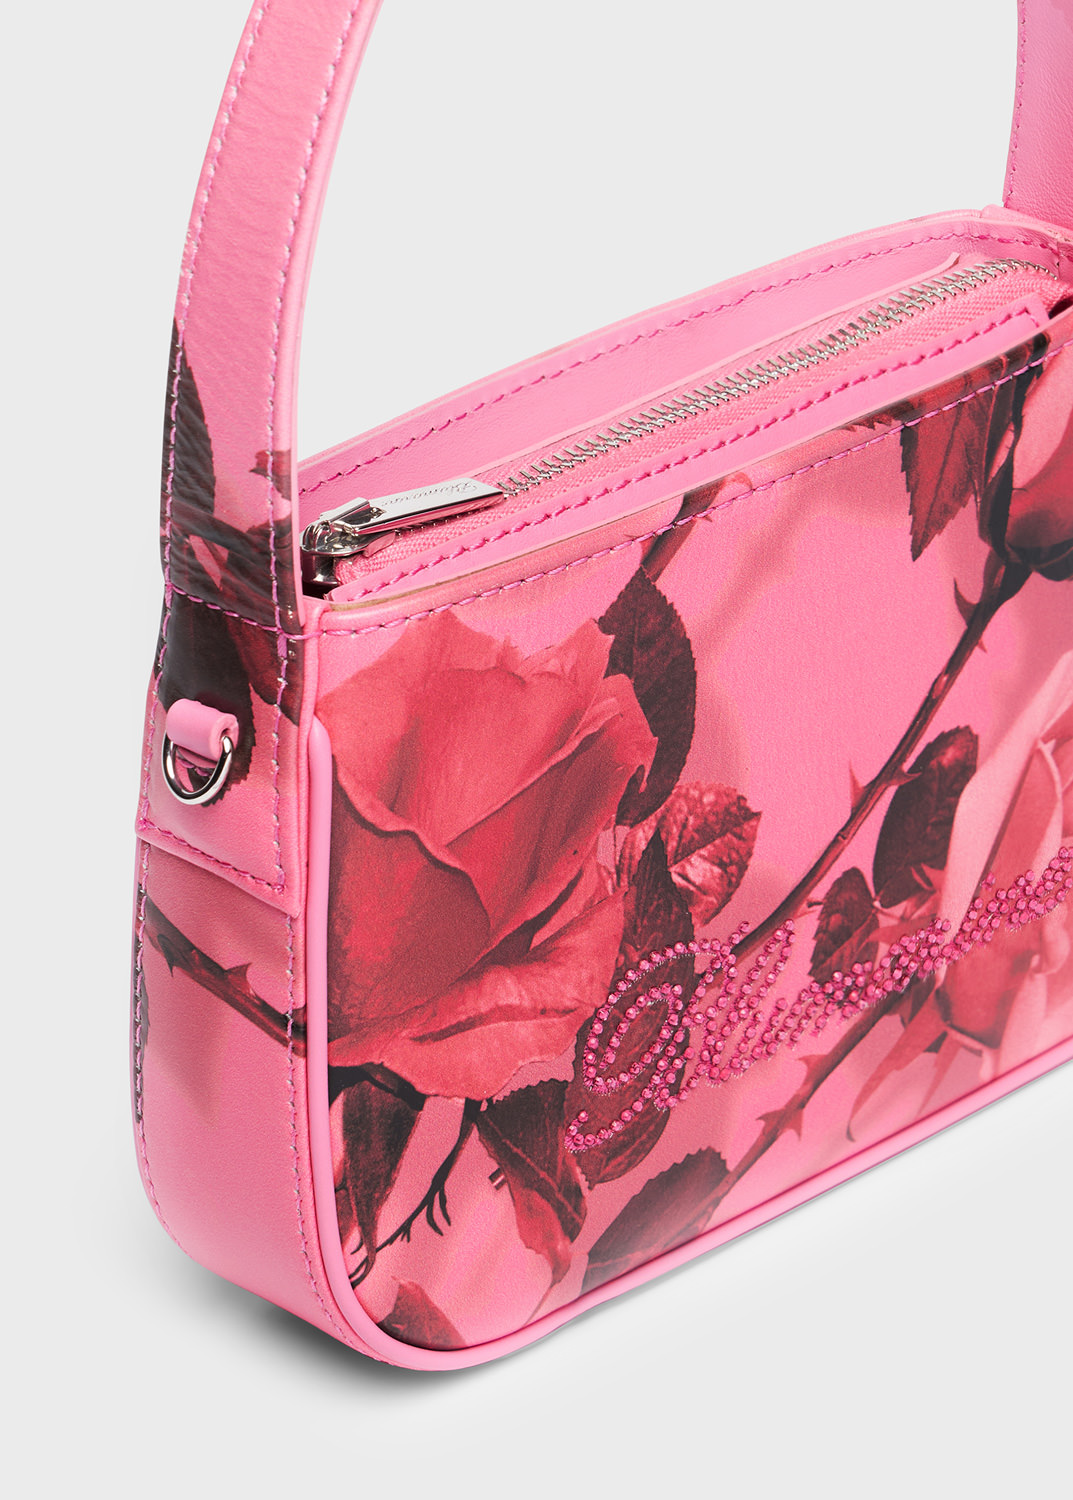 Bag in torchon rose print napa leather